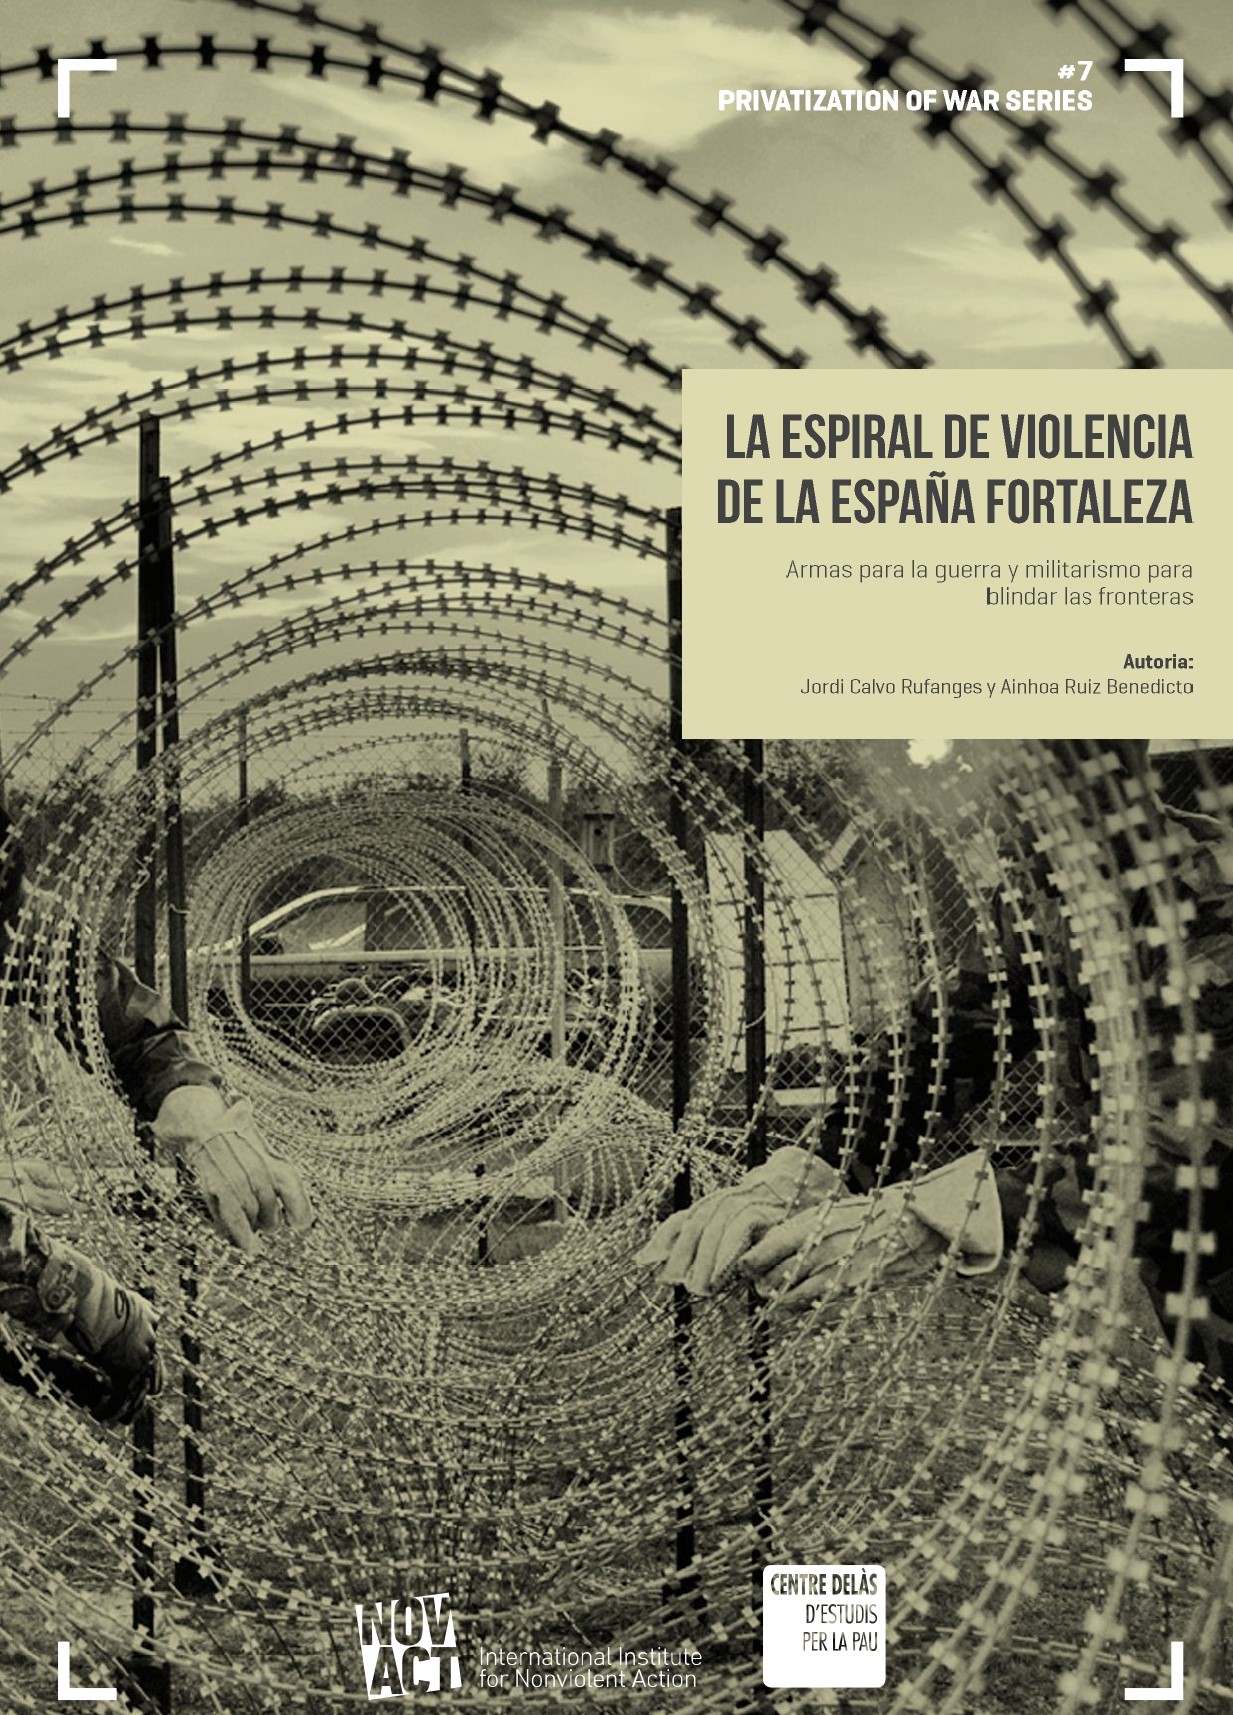 Report by the Centre Delàs and Novact: “The spiral of violence in Fortress Spain. Weapons for war and militarism to protect the borders”